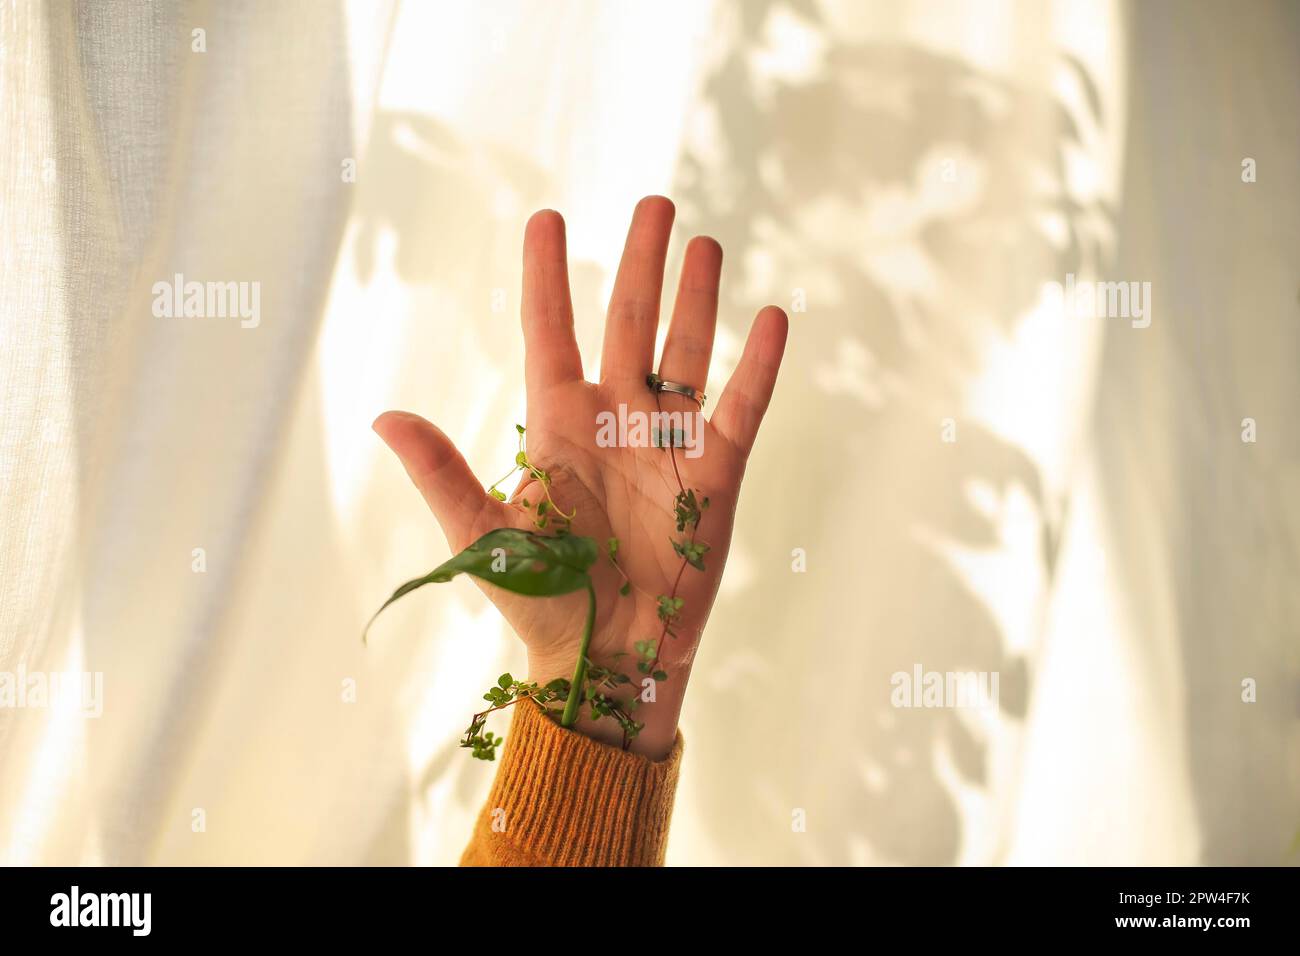 Green plant wrapped around female hand and fingers, greenery in palm against white fabric with shadow of leaves. Microgreens, superfood, vegan and Stock Photo